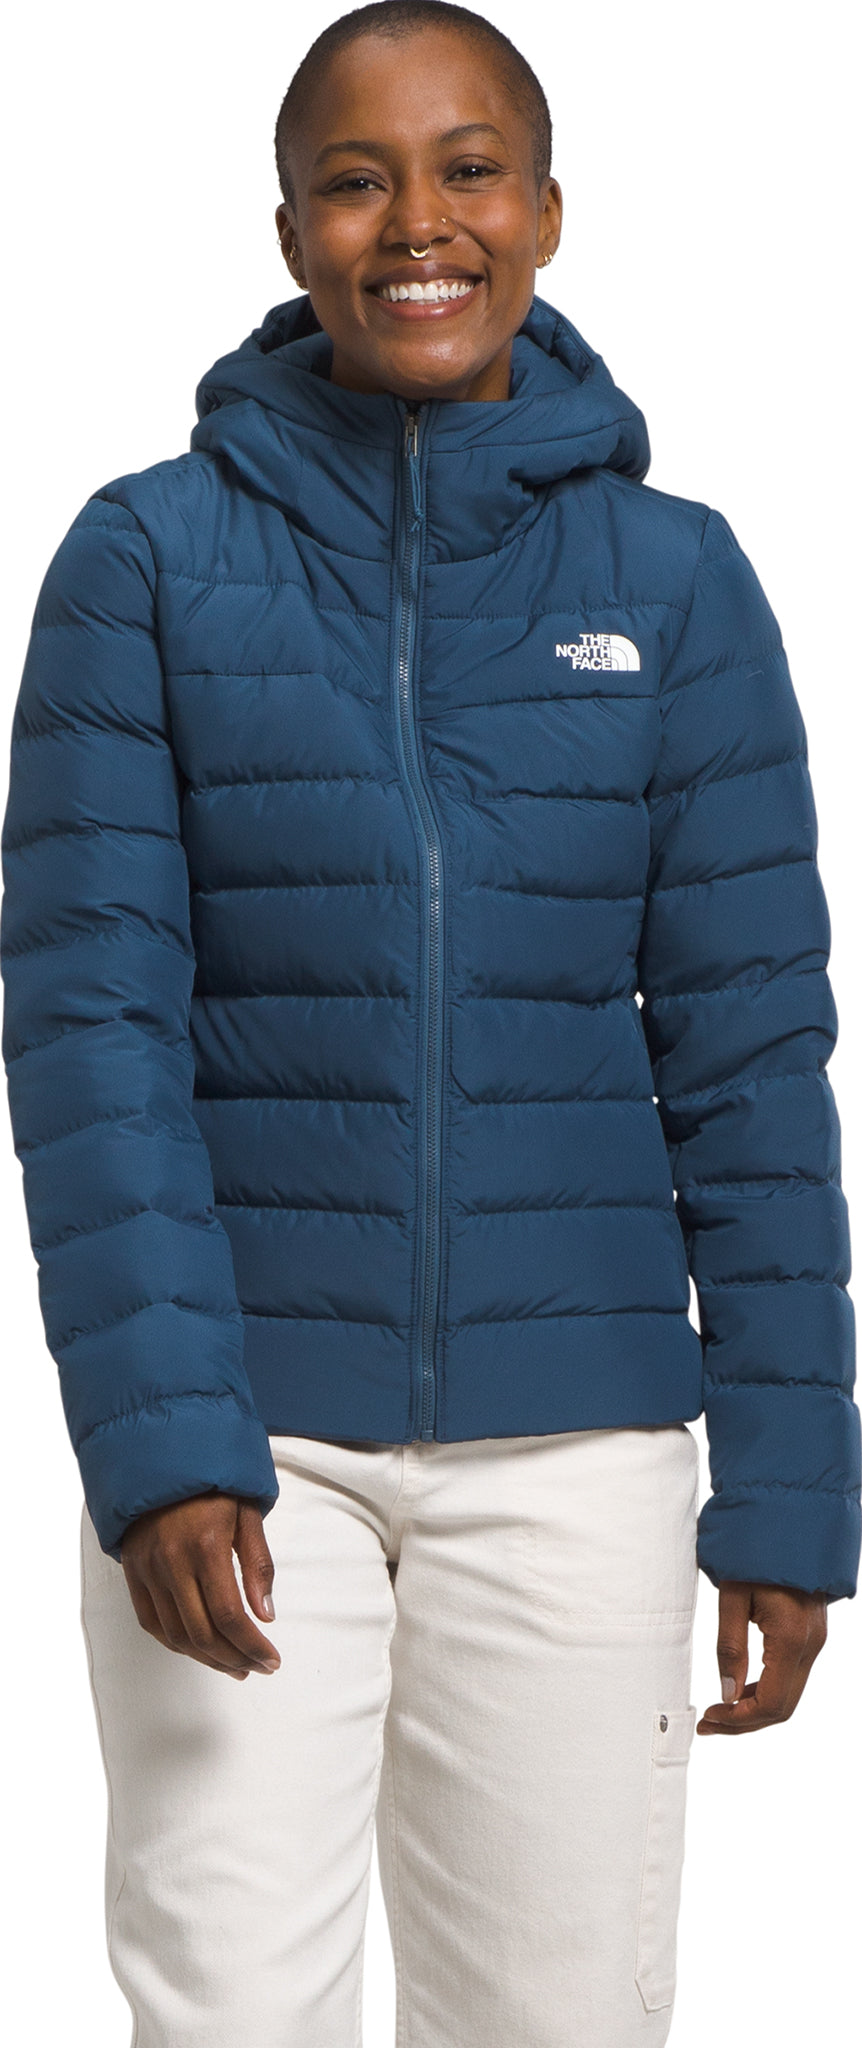 Femmes Accessoires  The North Face Canada